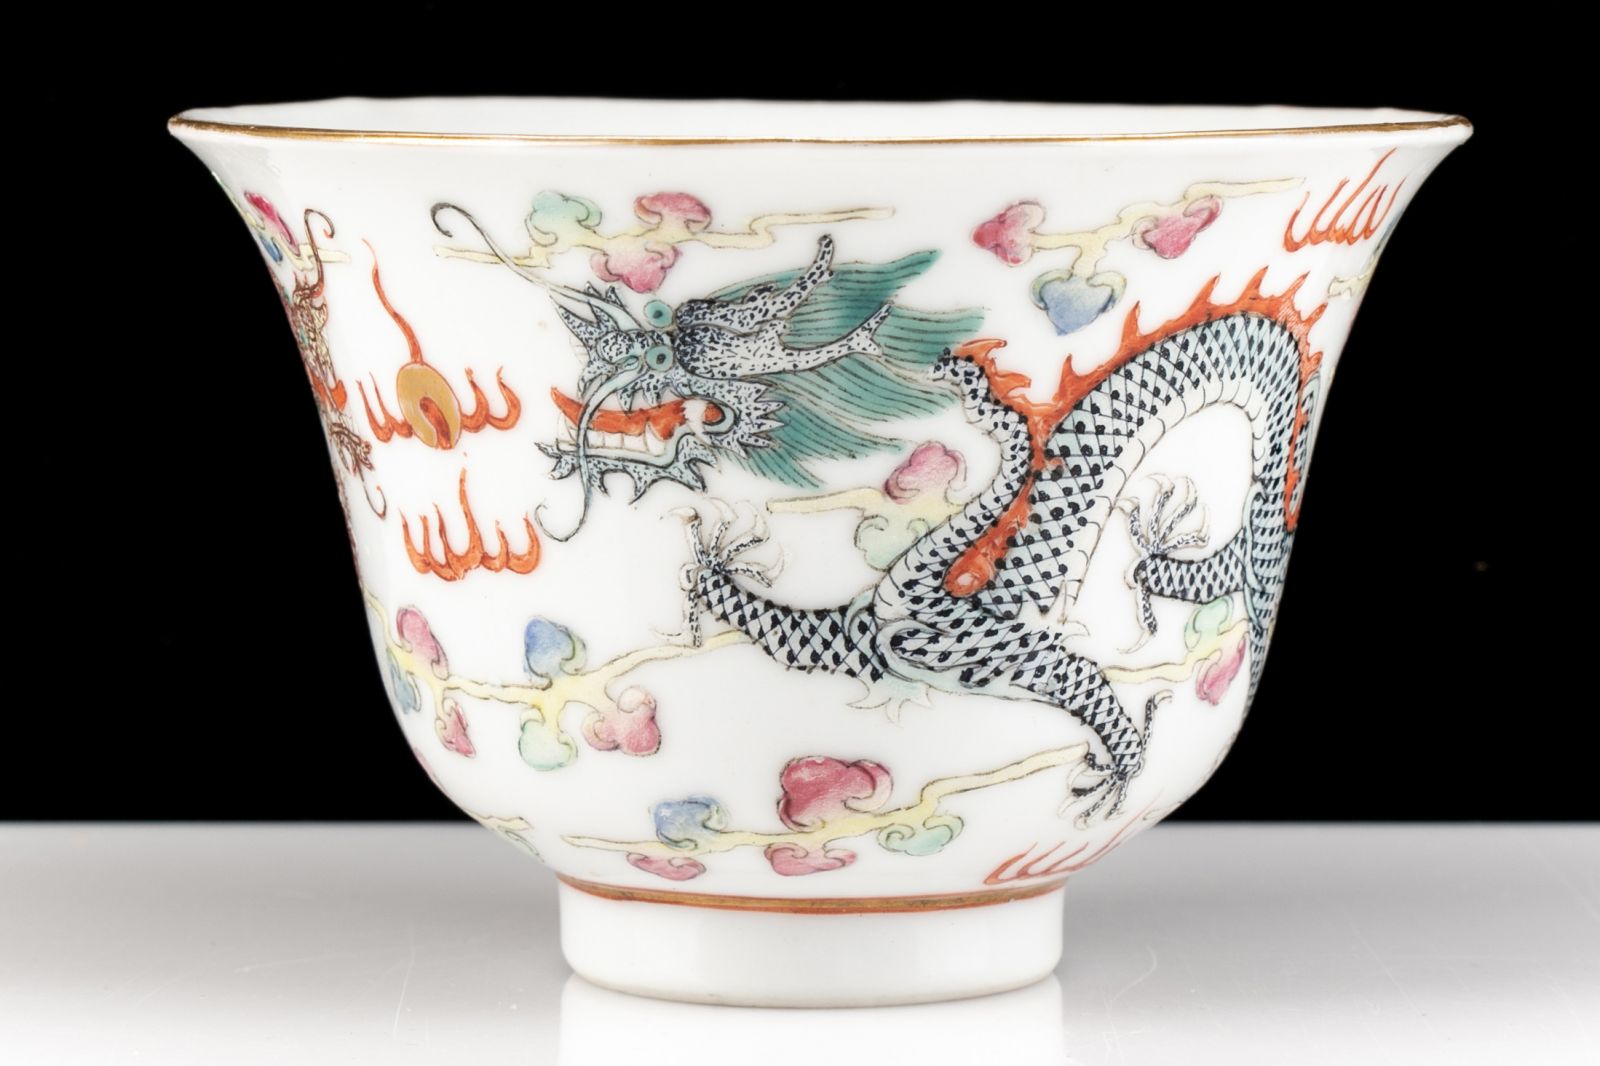 HAND PAINTED DRAGON BOWL, CHEN LONG, POSSIBLY NOT OF THE PERIOD